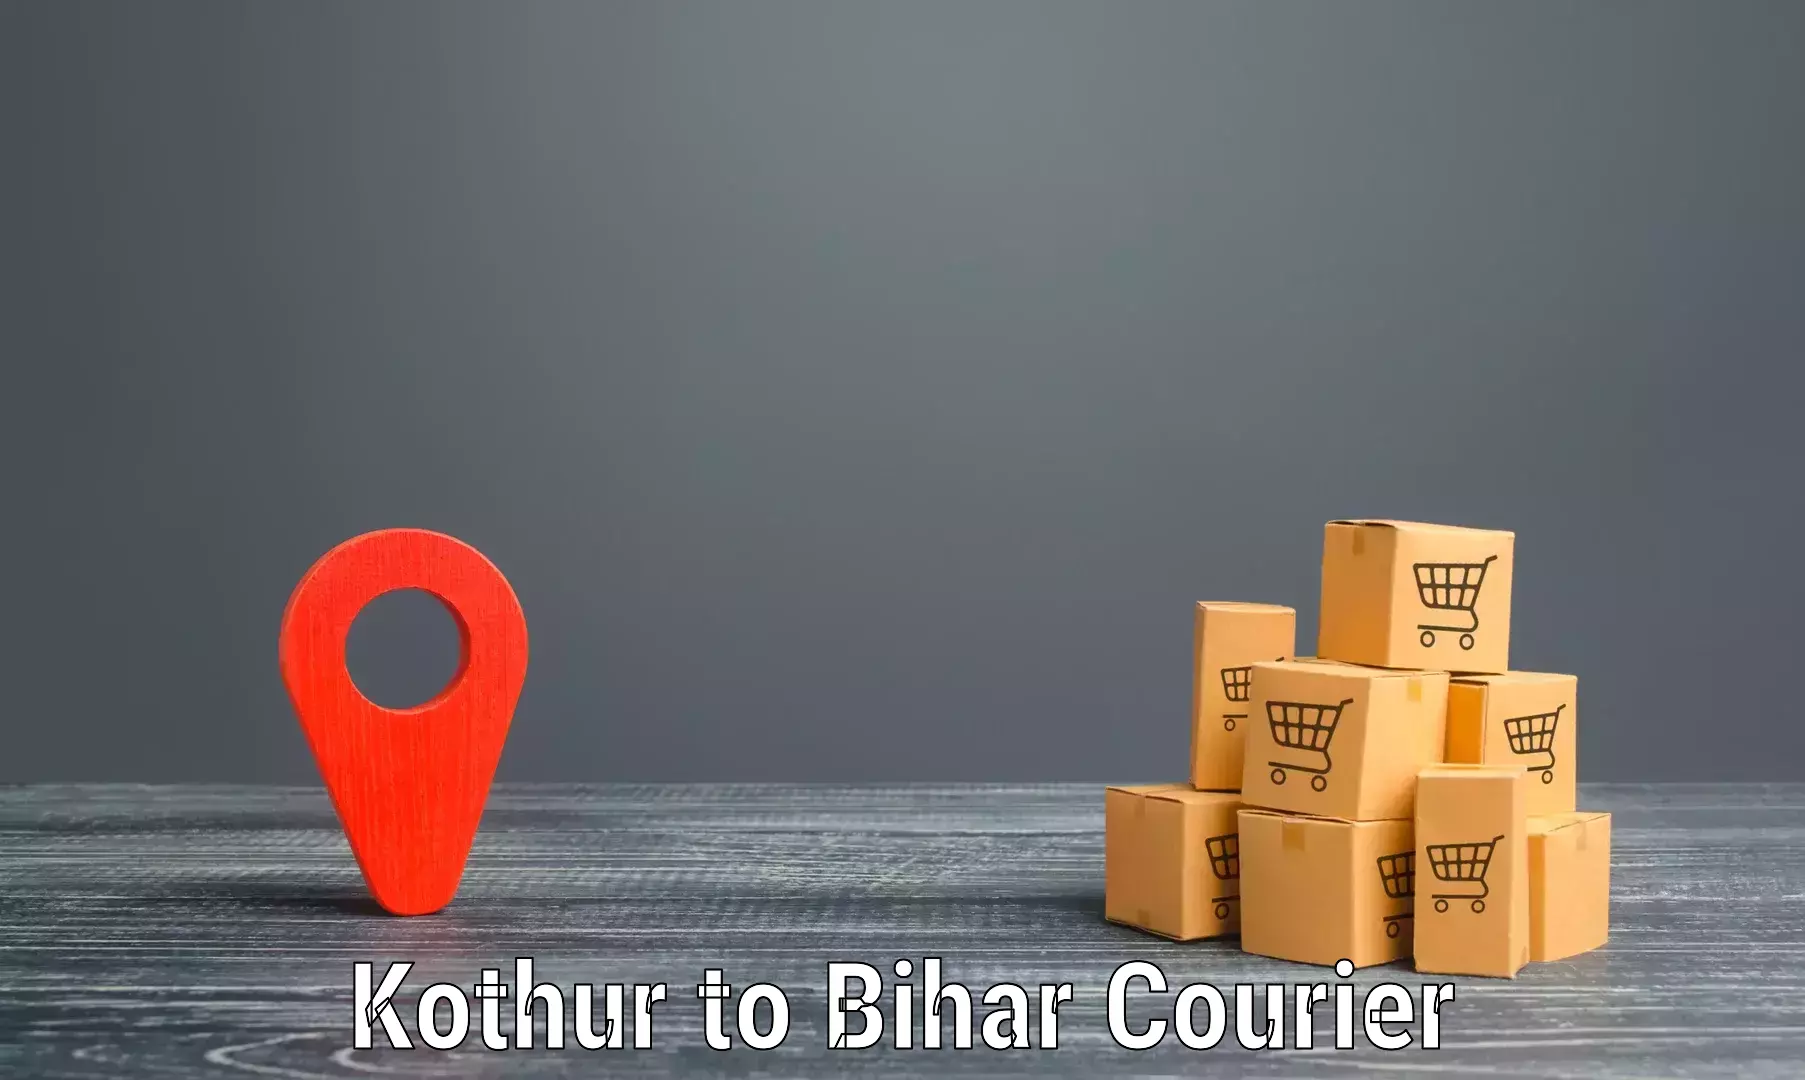 Courier service comparison in Kothur to Sharfuddinpur